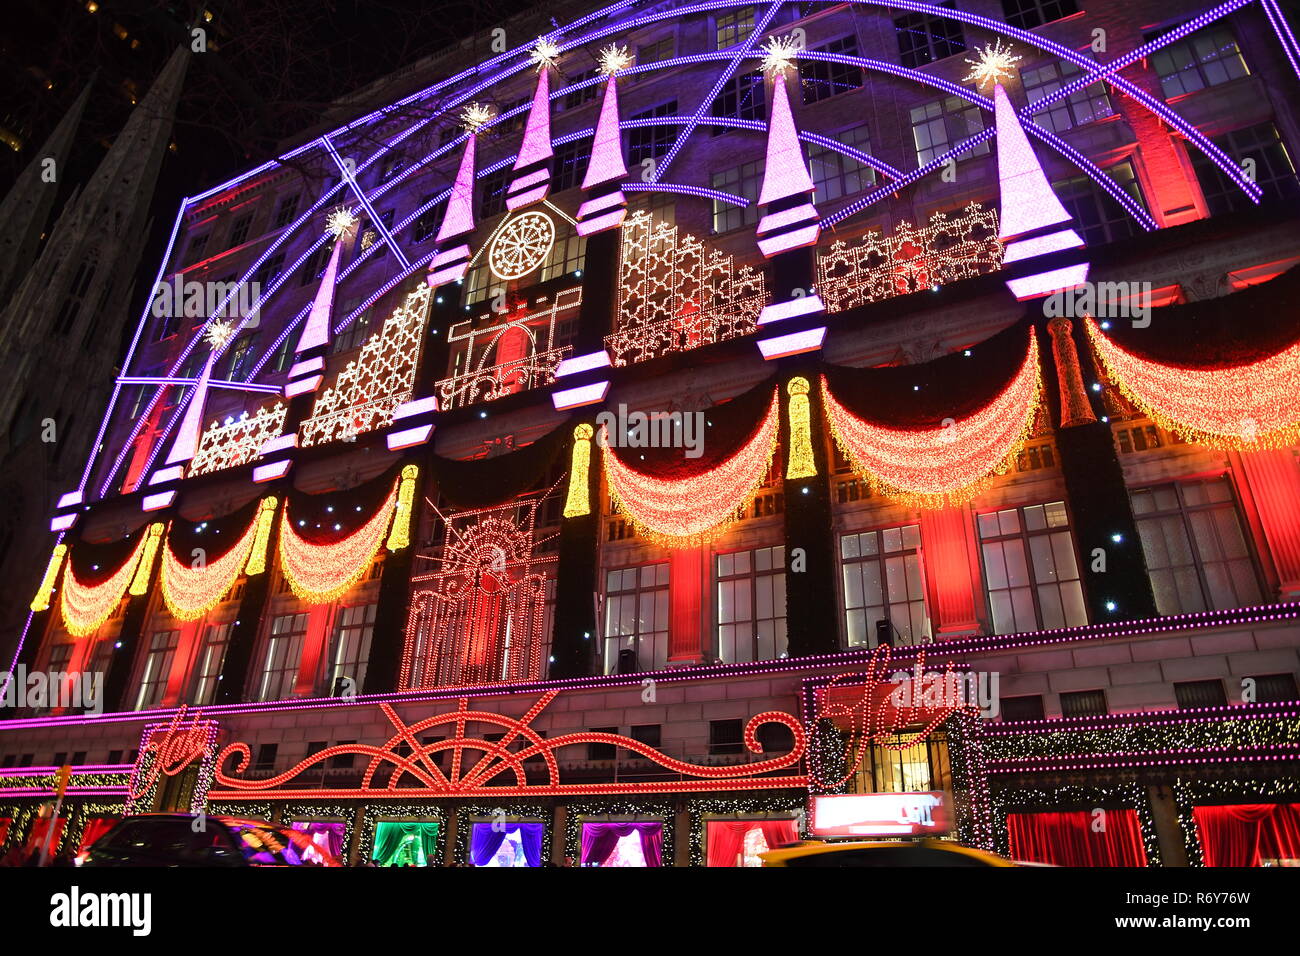 NEW YORK - DECEMBER 4, 2018: Saks Fifth Avenue’s magical Theater of Dreams themed 2018  ultimate light show and holiday windows displays on December 4 Stock Photo